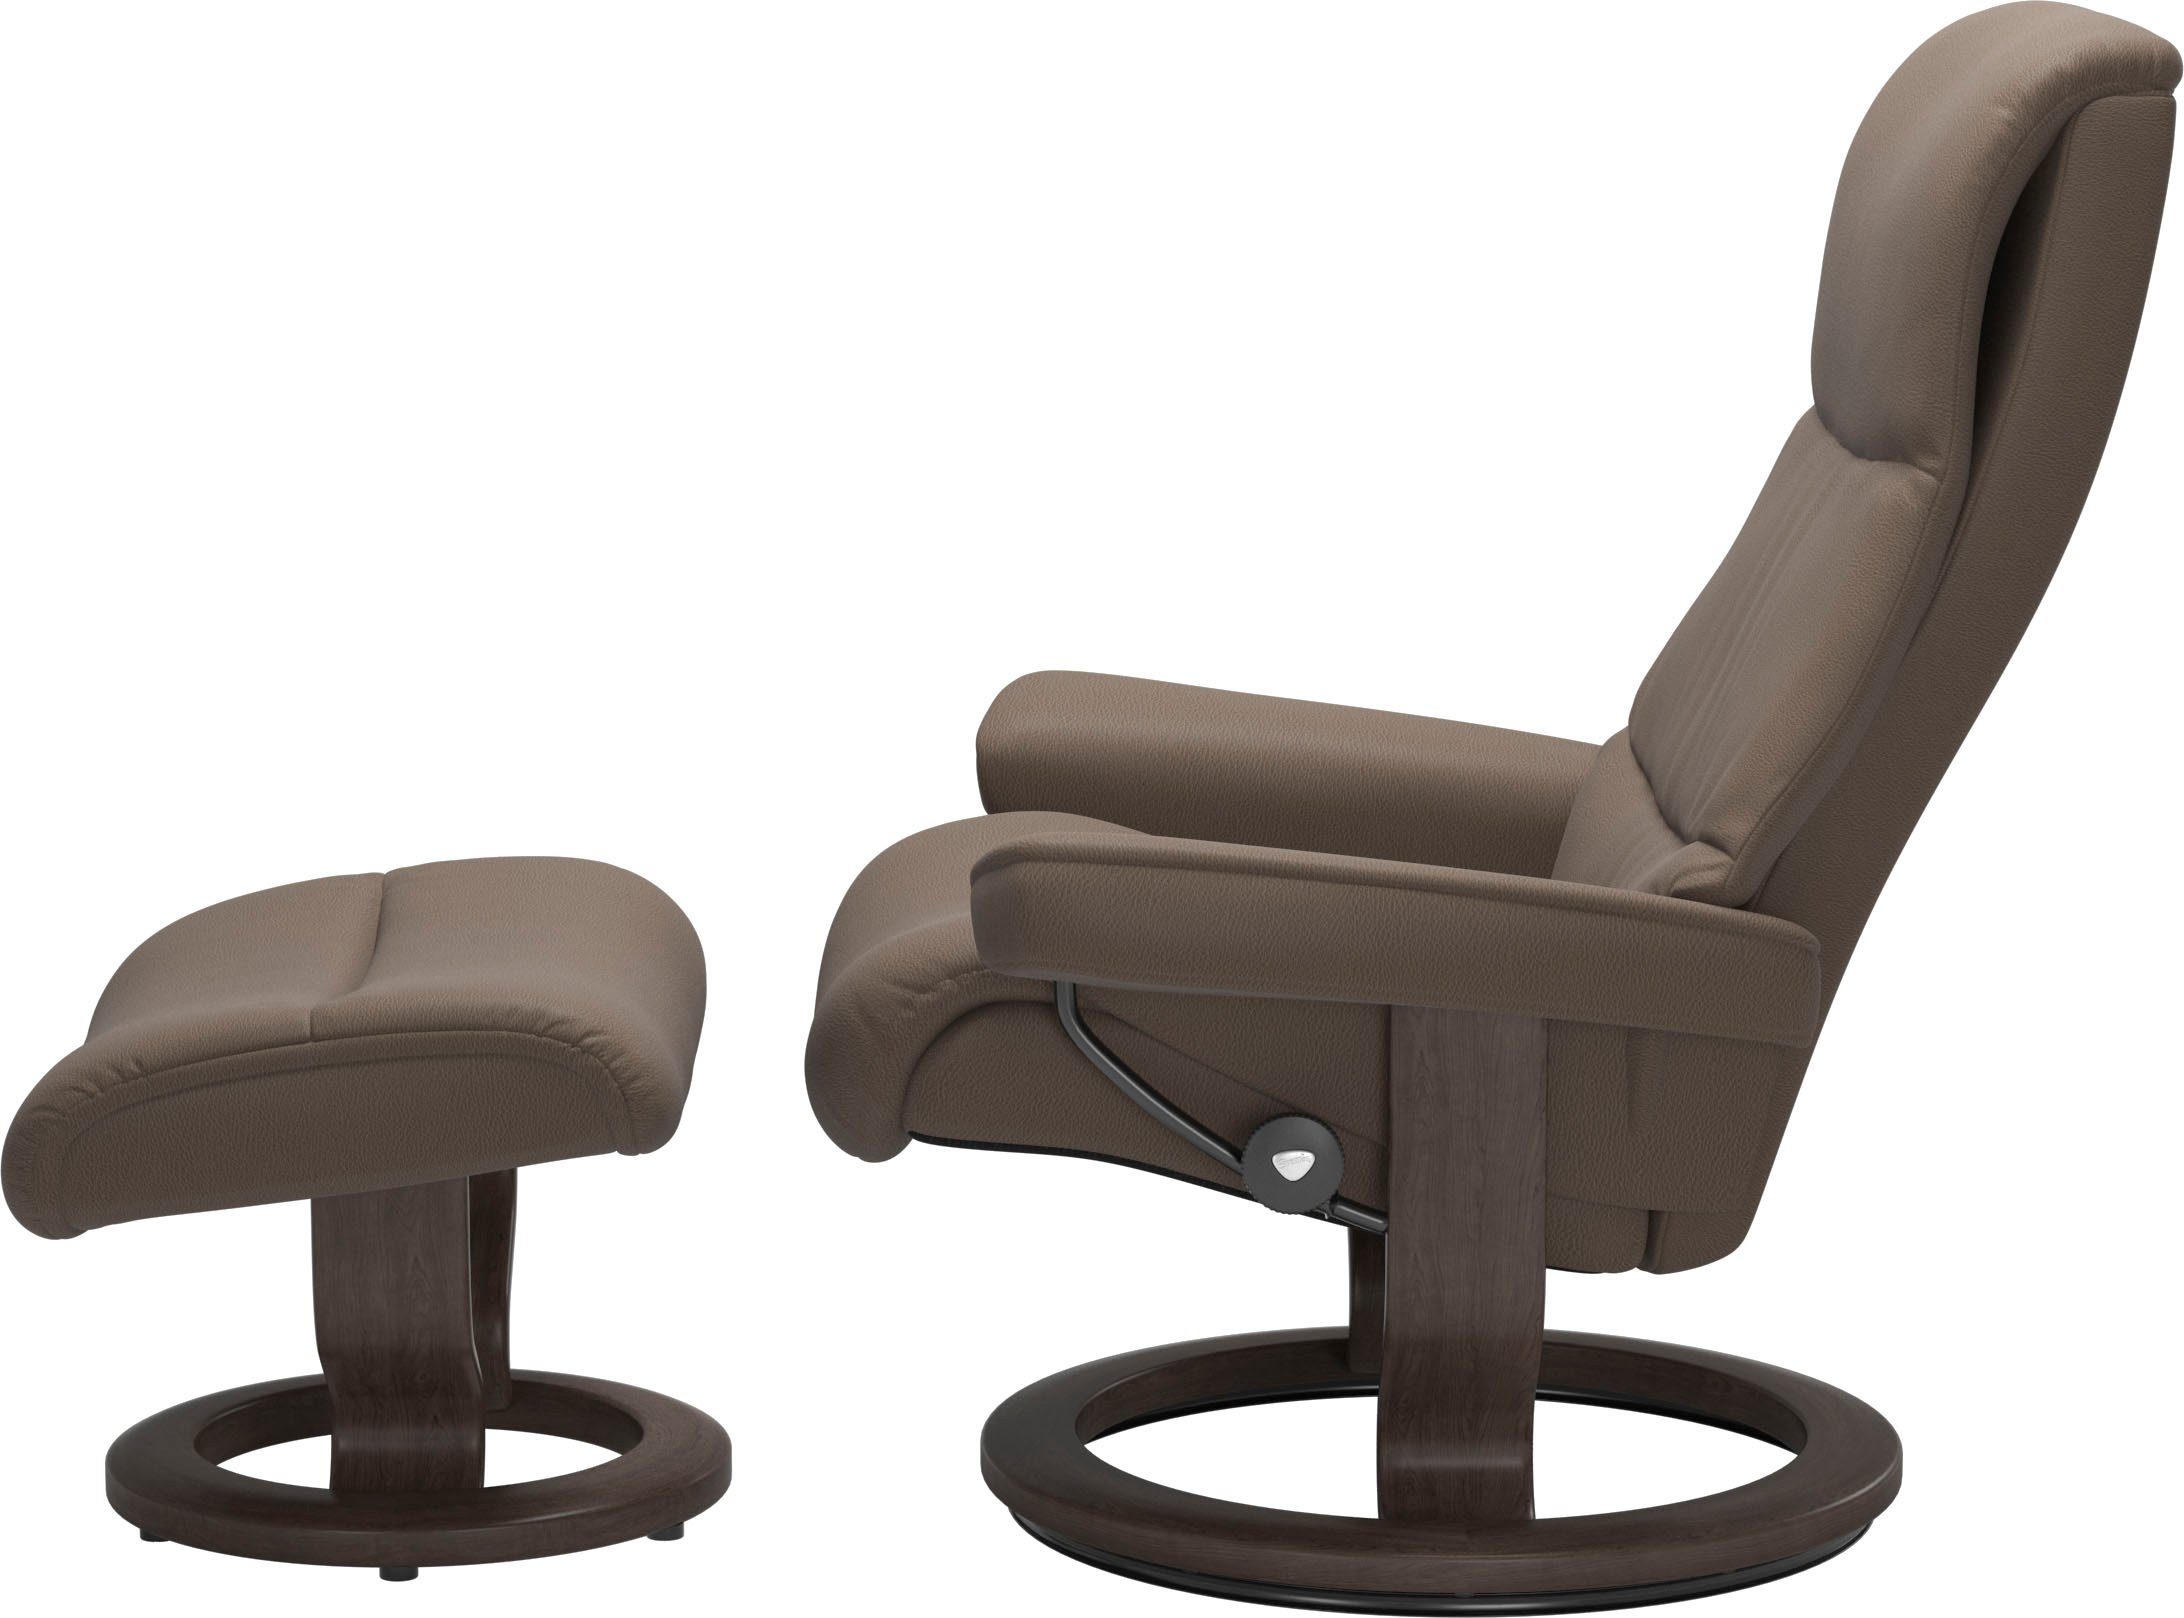 Base, M,Gestell View, Classic mit Relaxsessel Wenge Größe Stressless®